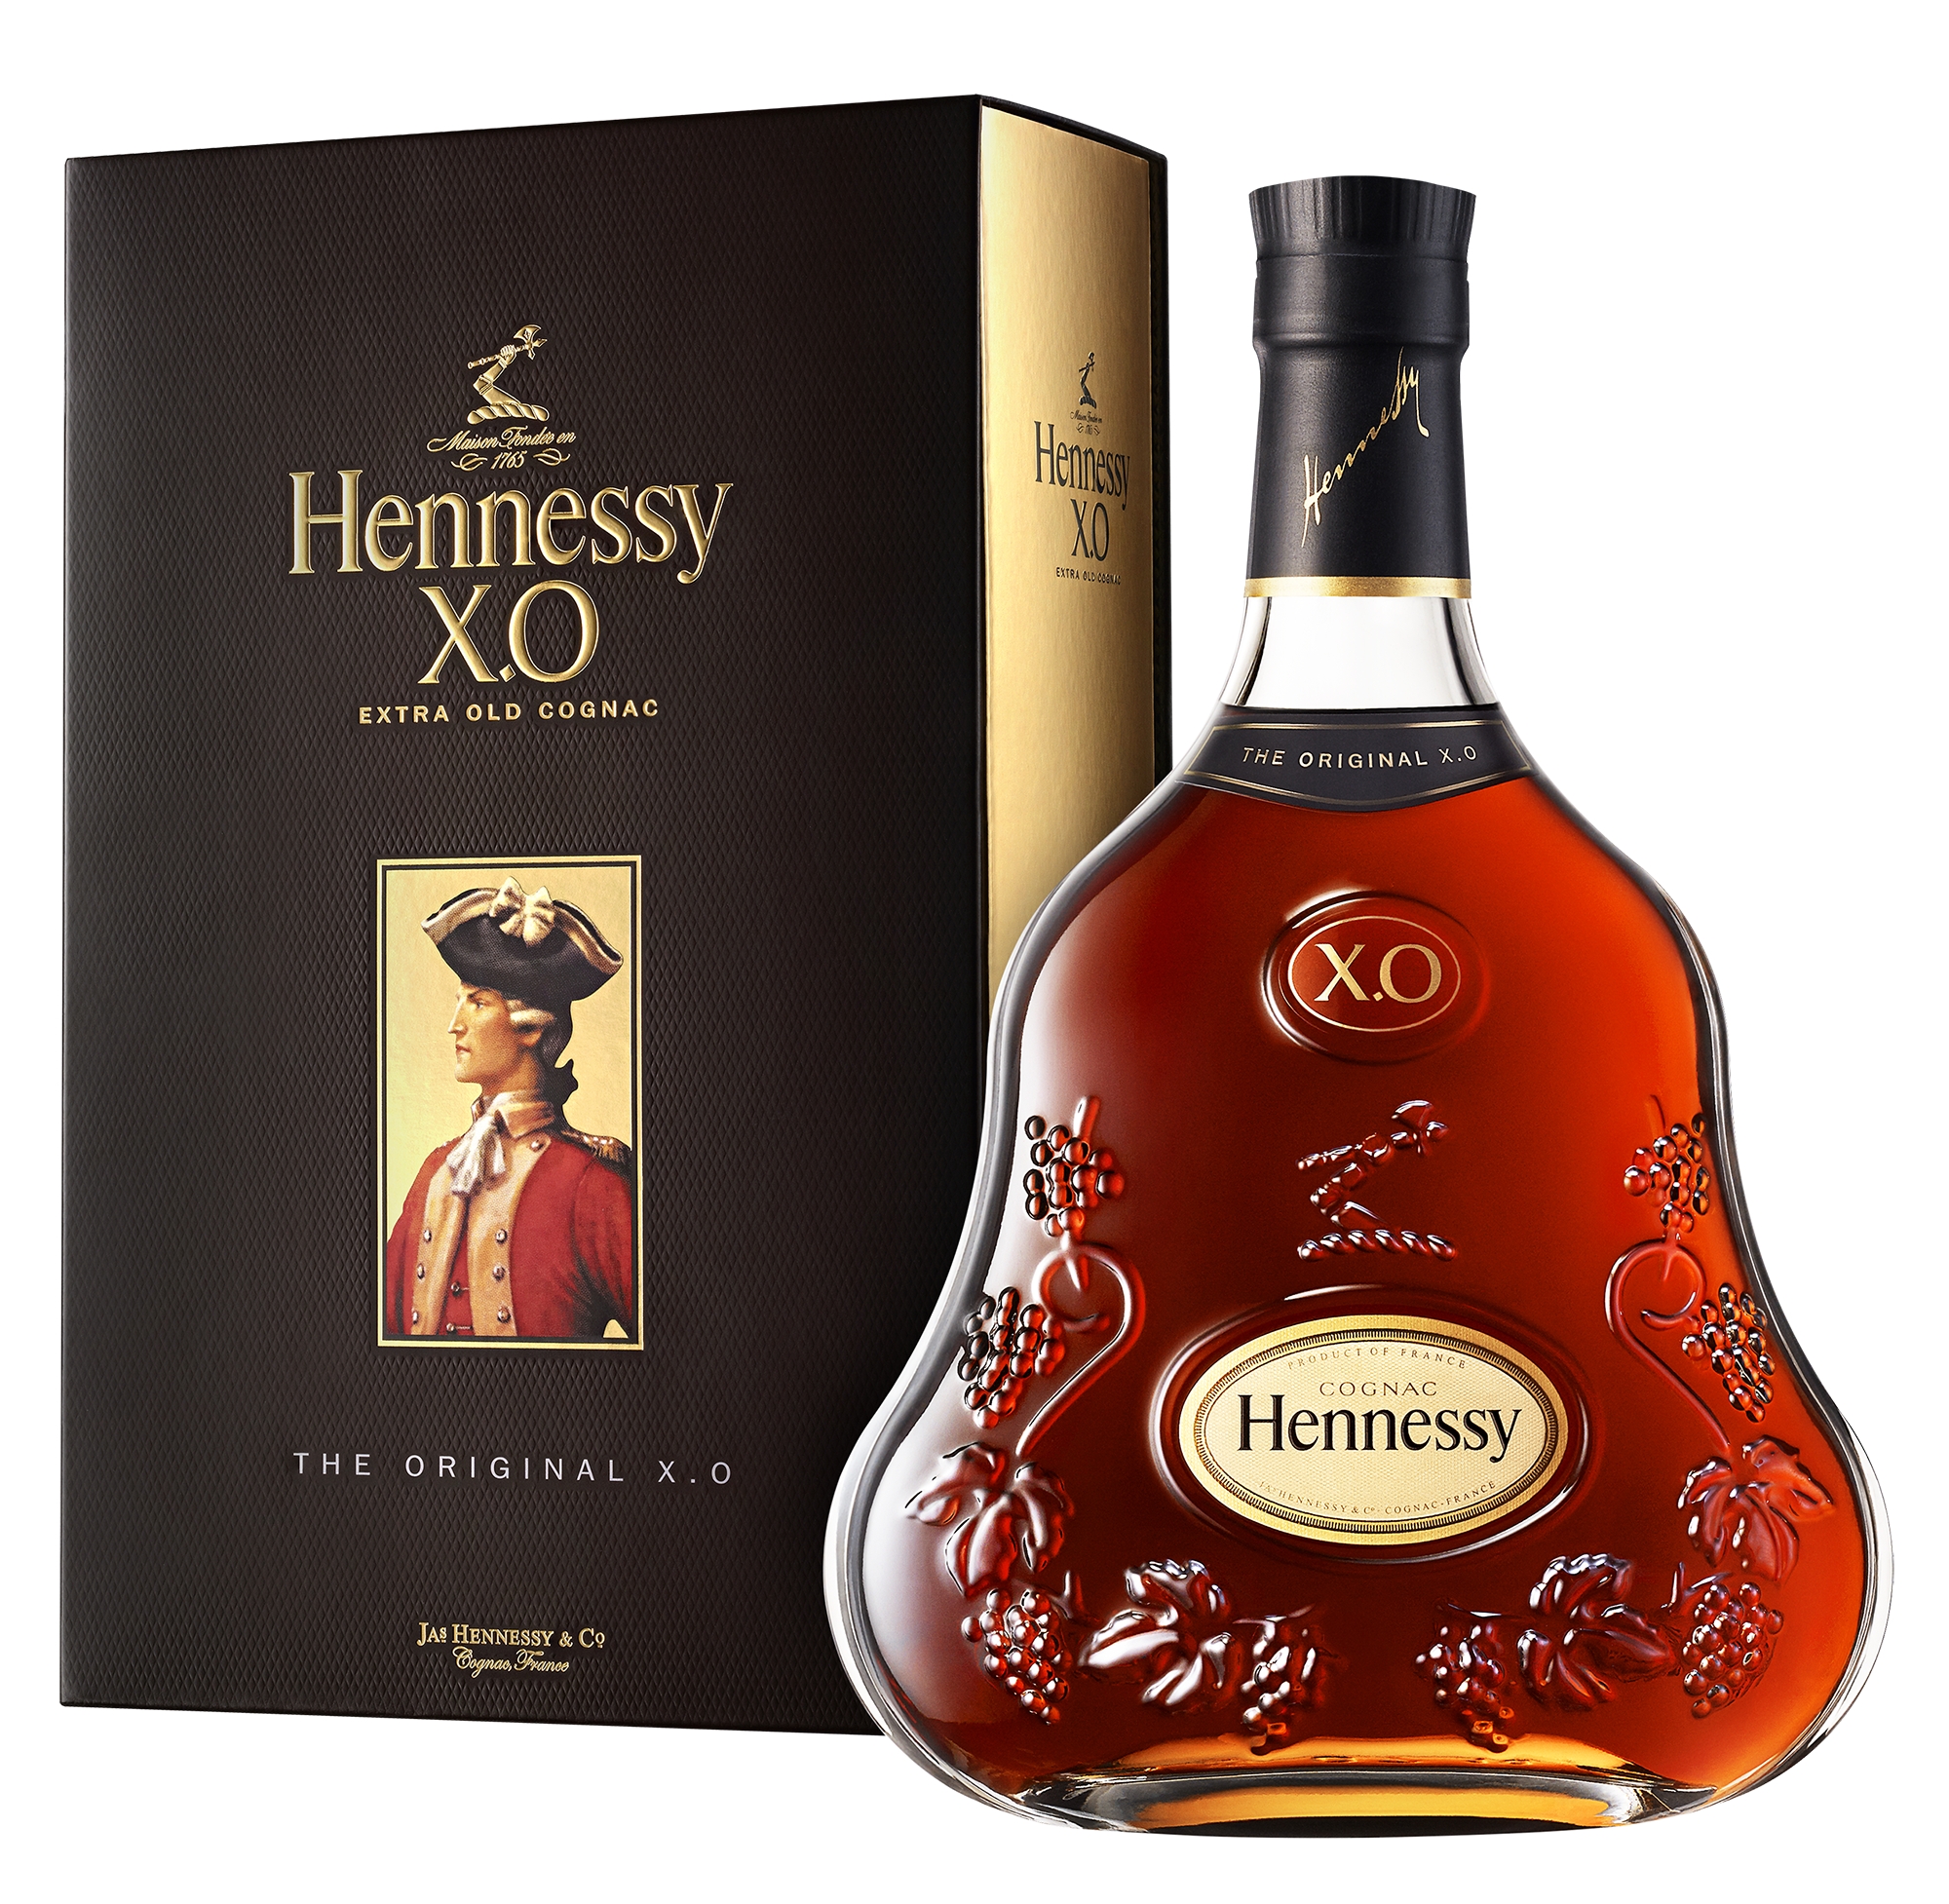 Hennessy - Cognac - Hennessy X.O - Boxed - Exclusive Luxury Limited Edition  - 700 ml - 6 bt